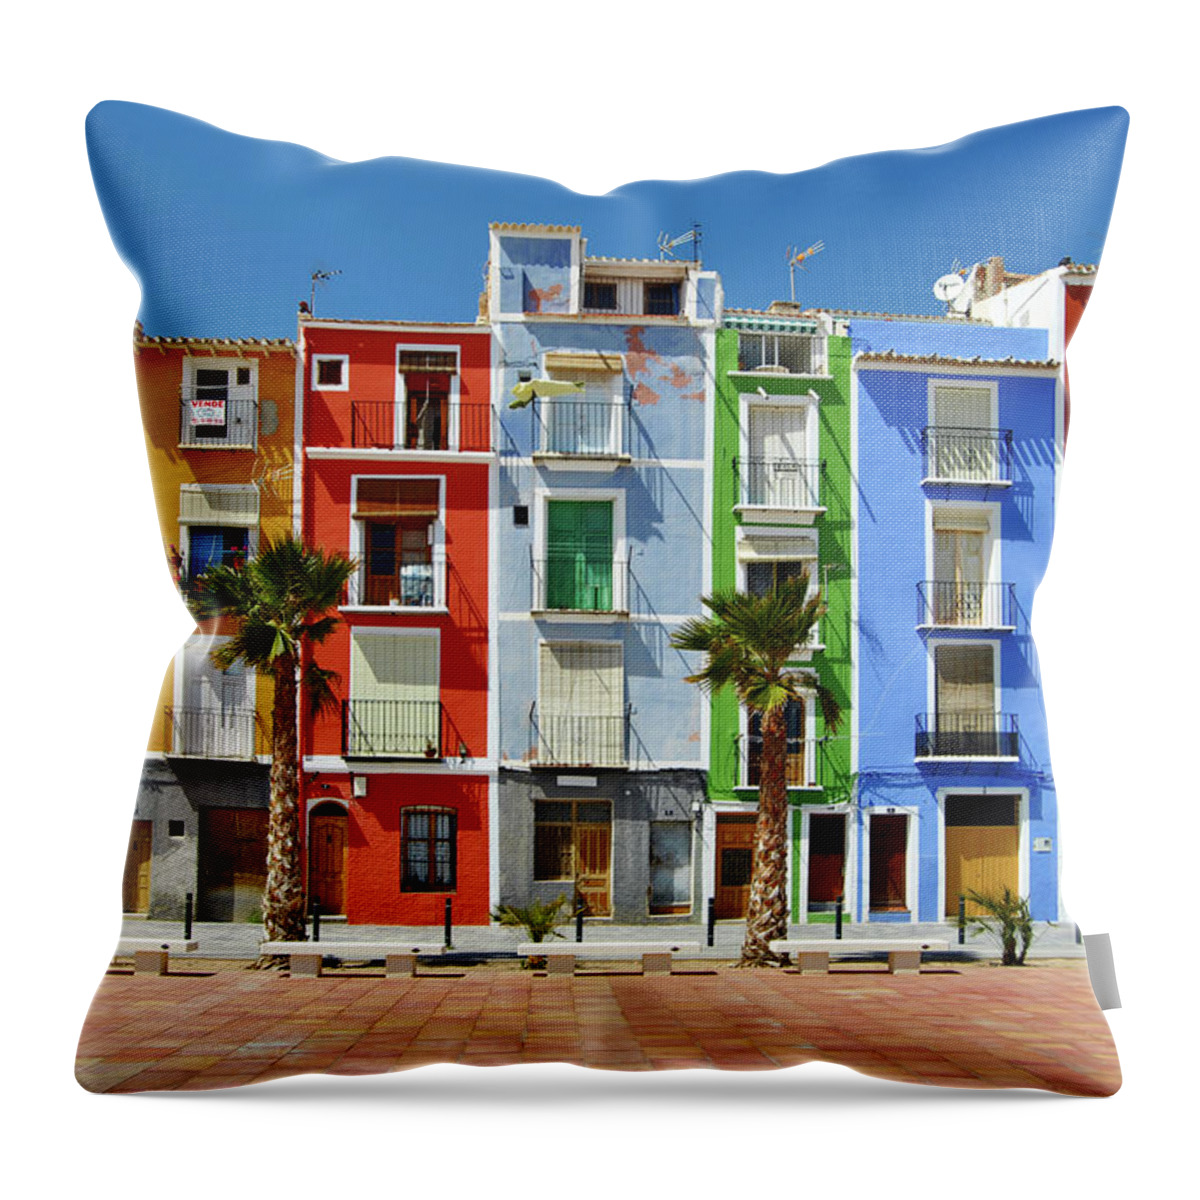 Clear Sky Throw Pillow featuring the photograph Houses In La Vila Joyosa by A Richard Poolton Image